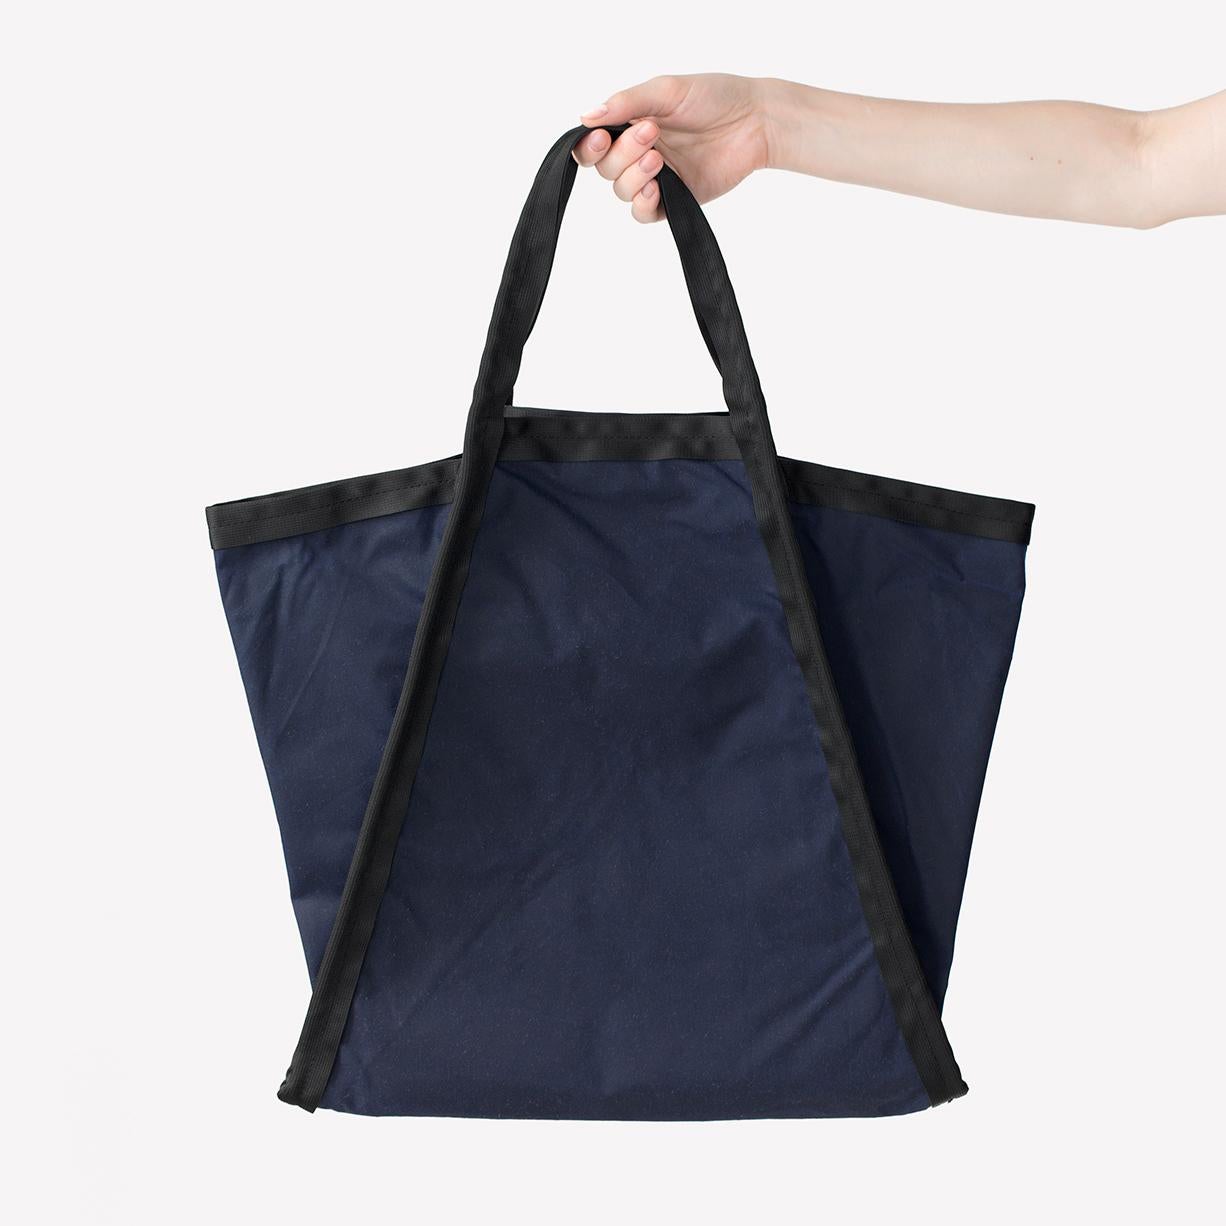 Maharam Bag
Three by Konstantin Grcic 
003 Indigo/Black

Konstantin Grcic (b. 1965, Germany) is a Munich-based industrial designer who combines deep research with an investigation into emerging technologies. He trained as a cabinetmaker before